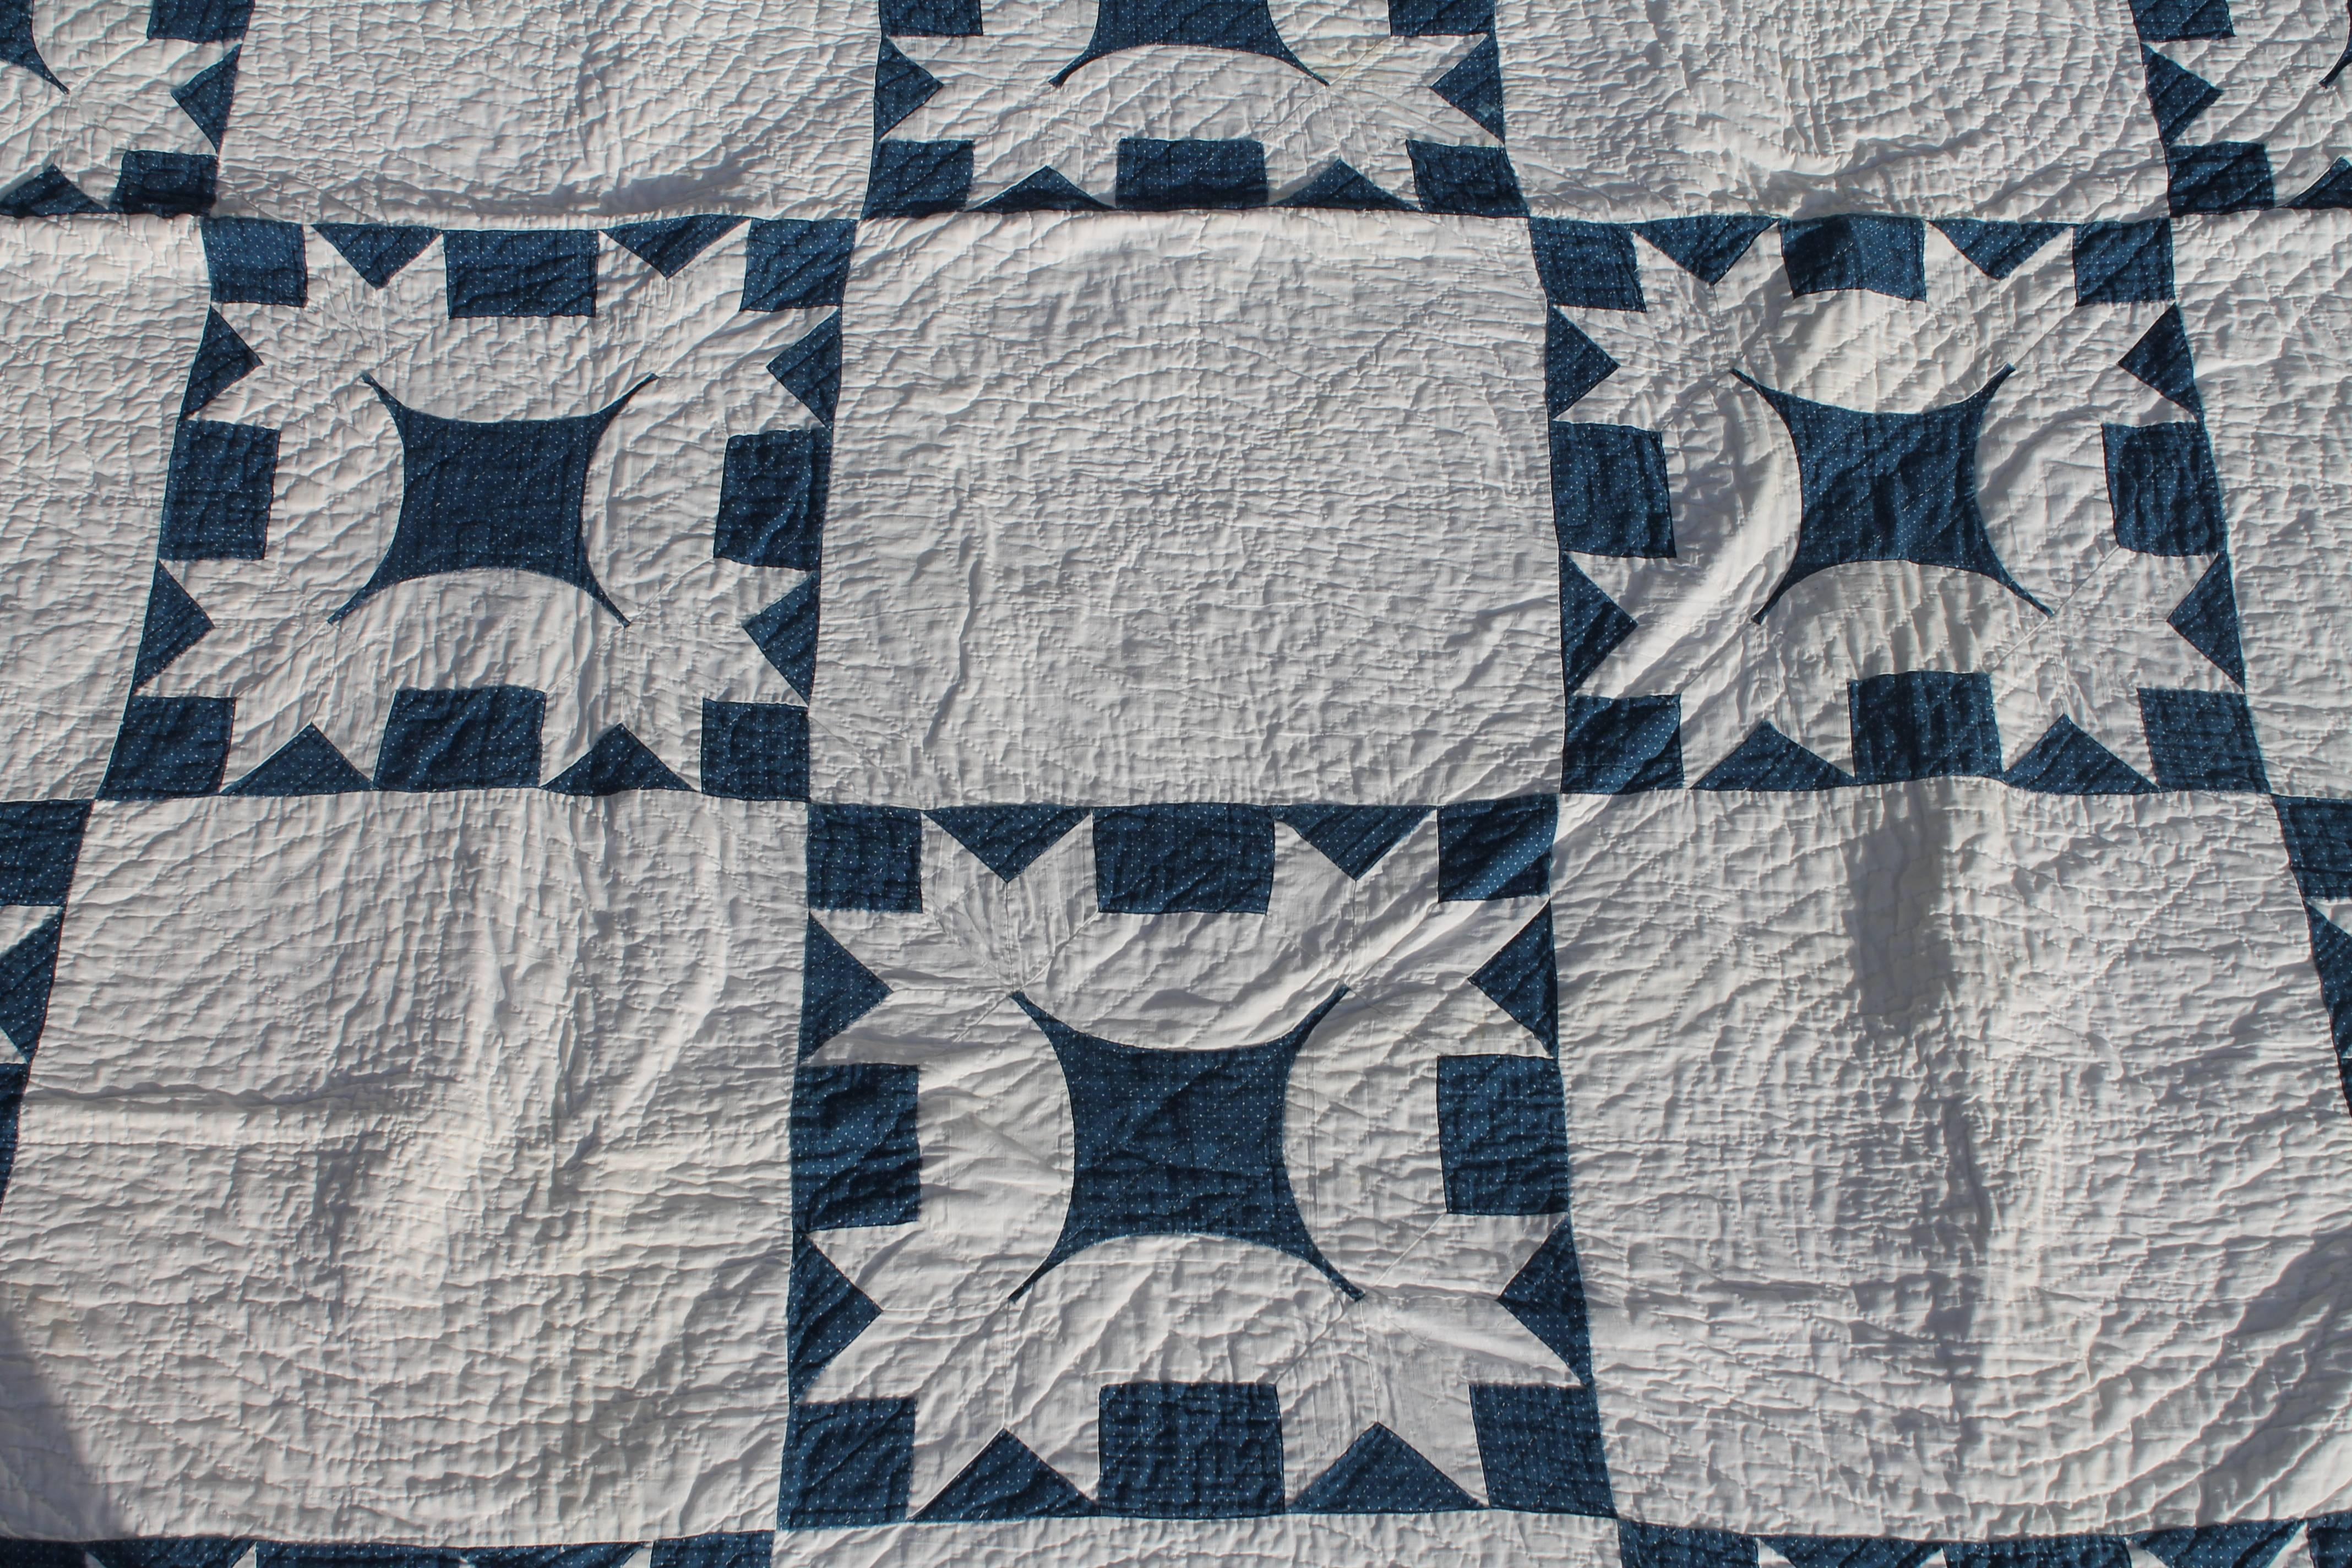 This finely quilted and pieced blue and white quilt is in pristine condition. This is a presentation quilt.
Signed Mary Aline Handay. A (word Unknown) from her grandmother Mary F. Goldin. 79 yrs of Age -1909-